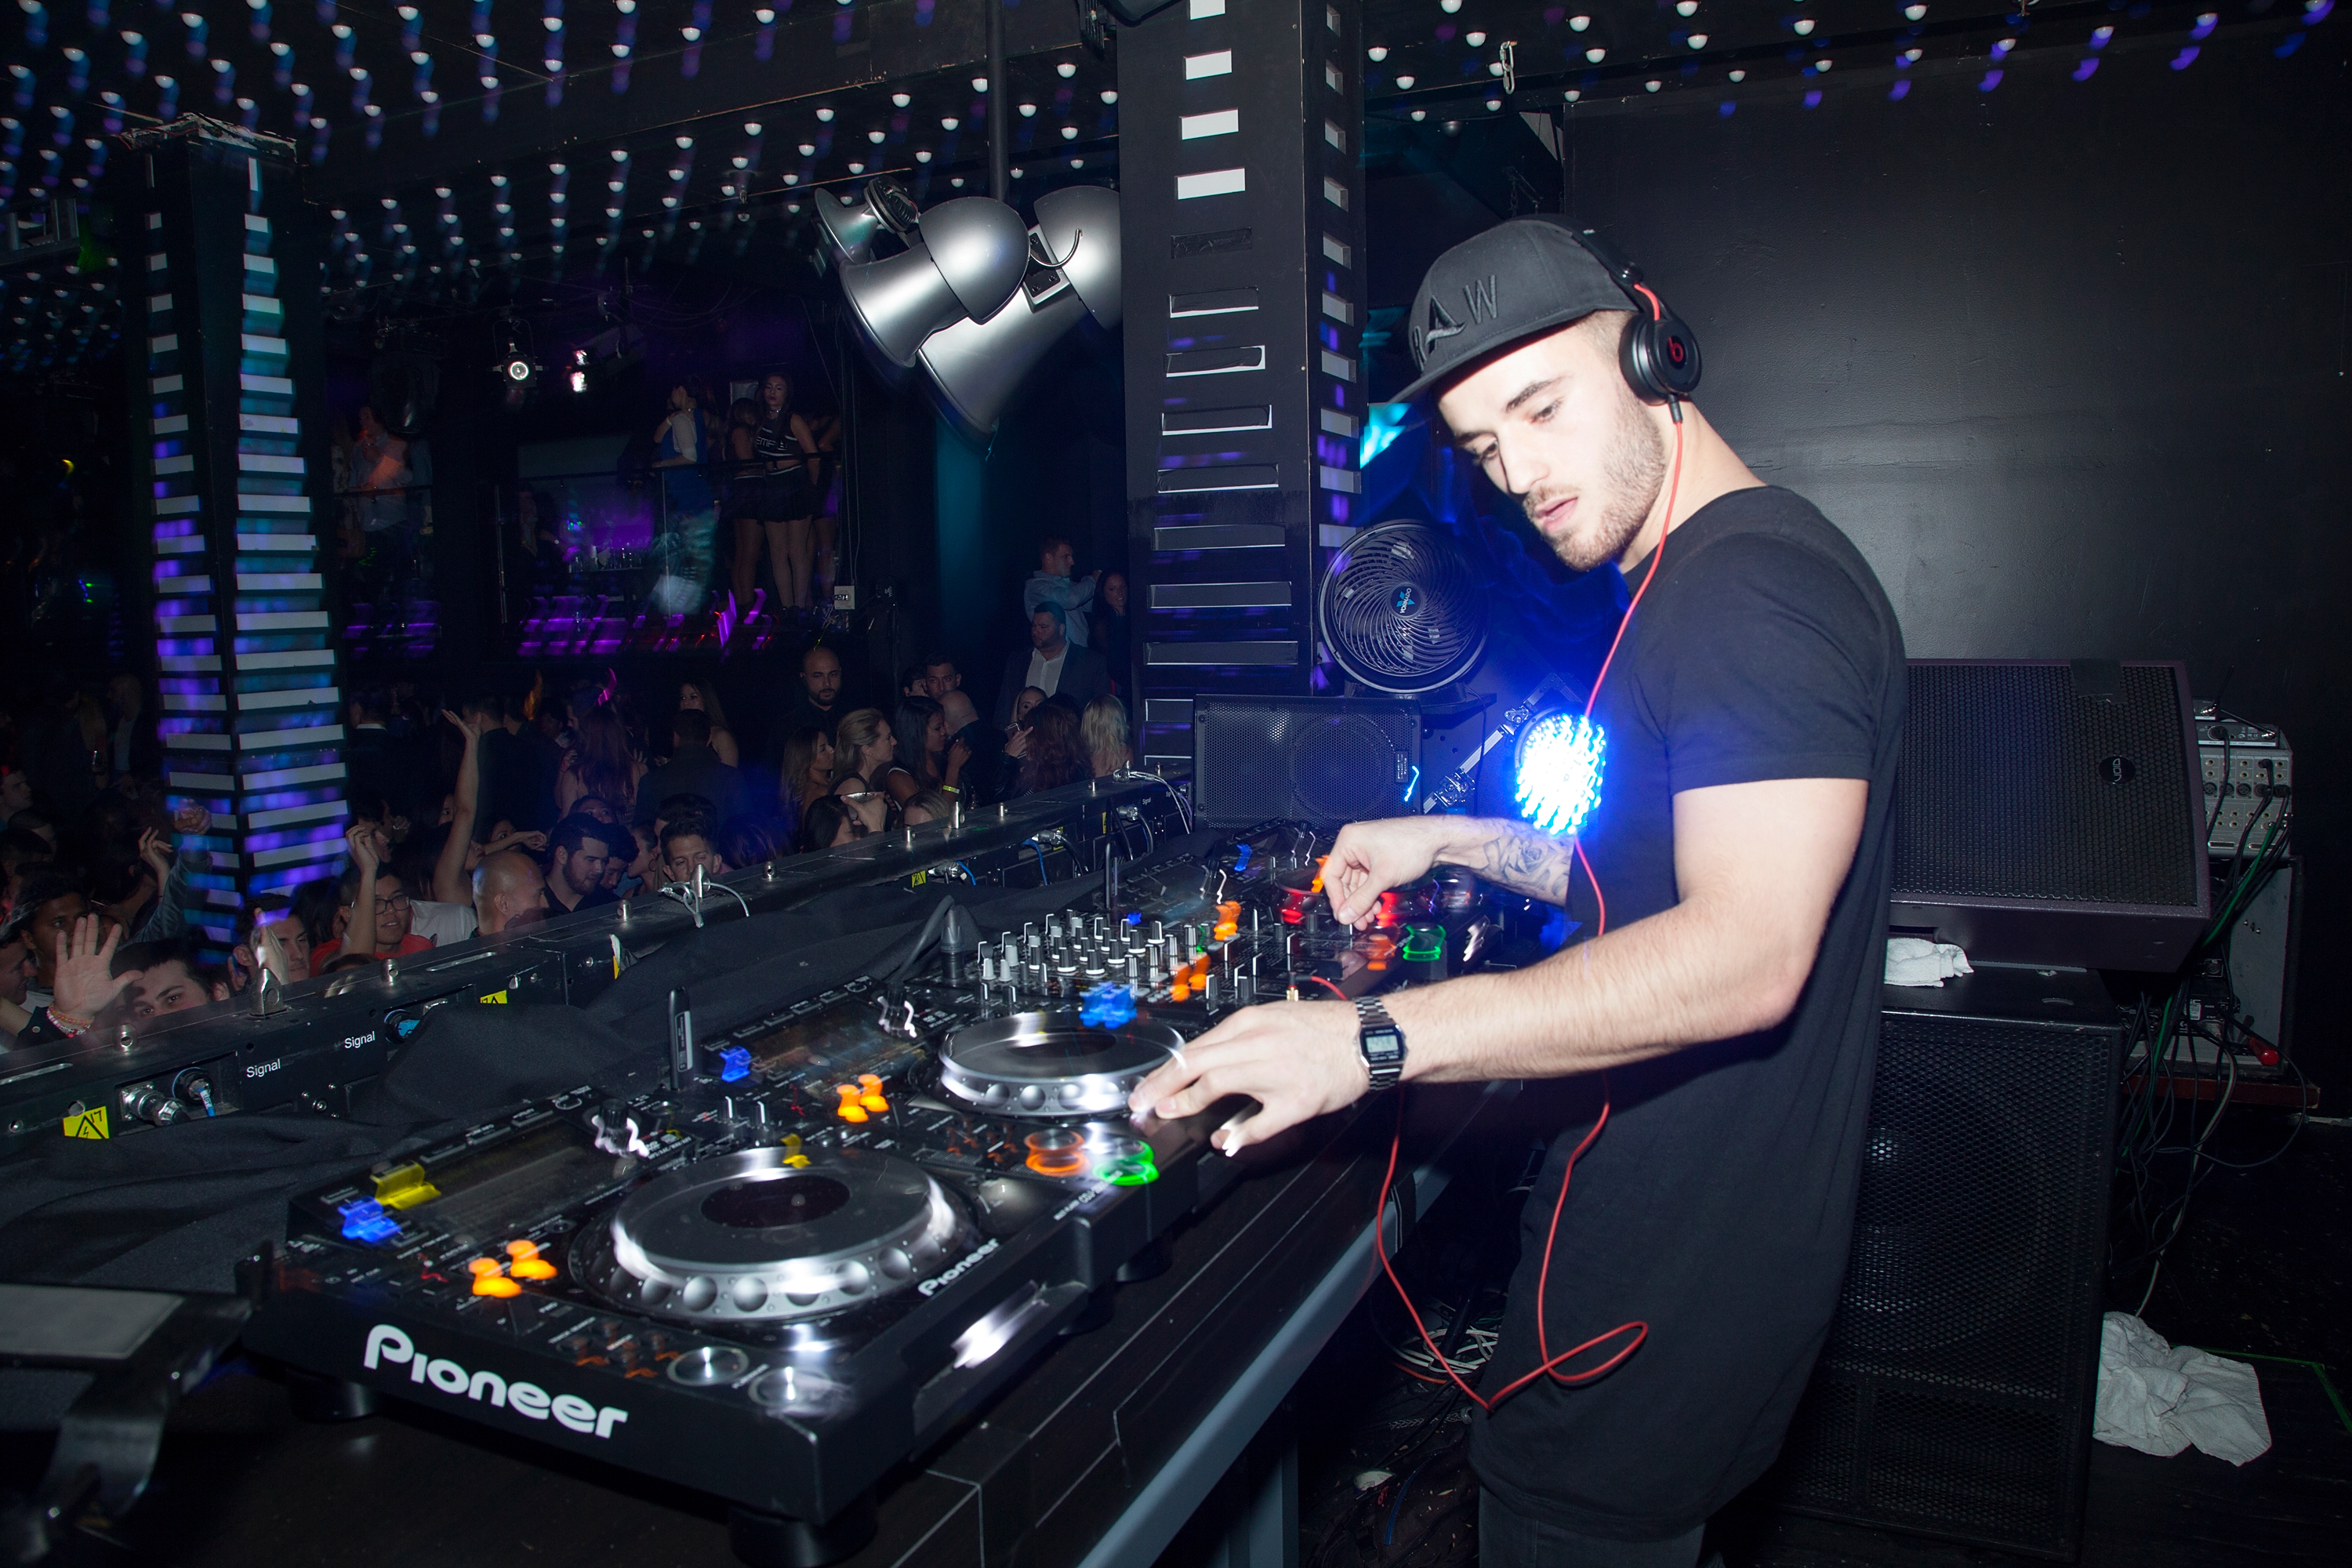 A DJ is mixing music at a club with a crowd in the background, vibrant lights, and a booth with equipment.